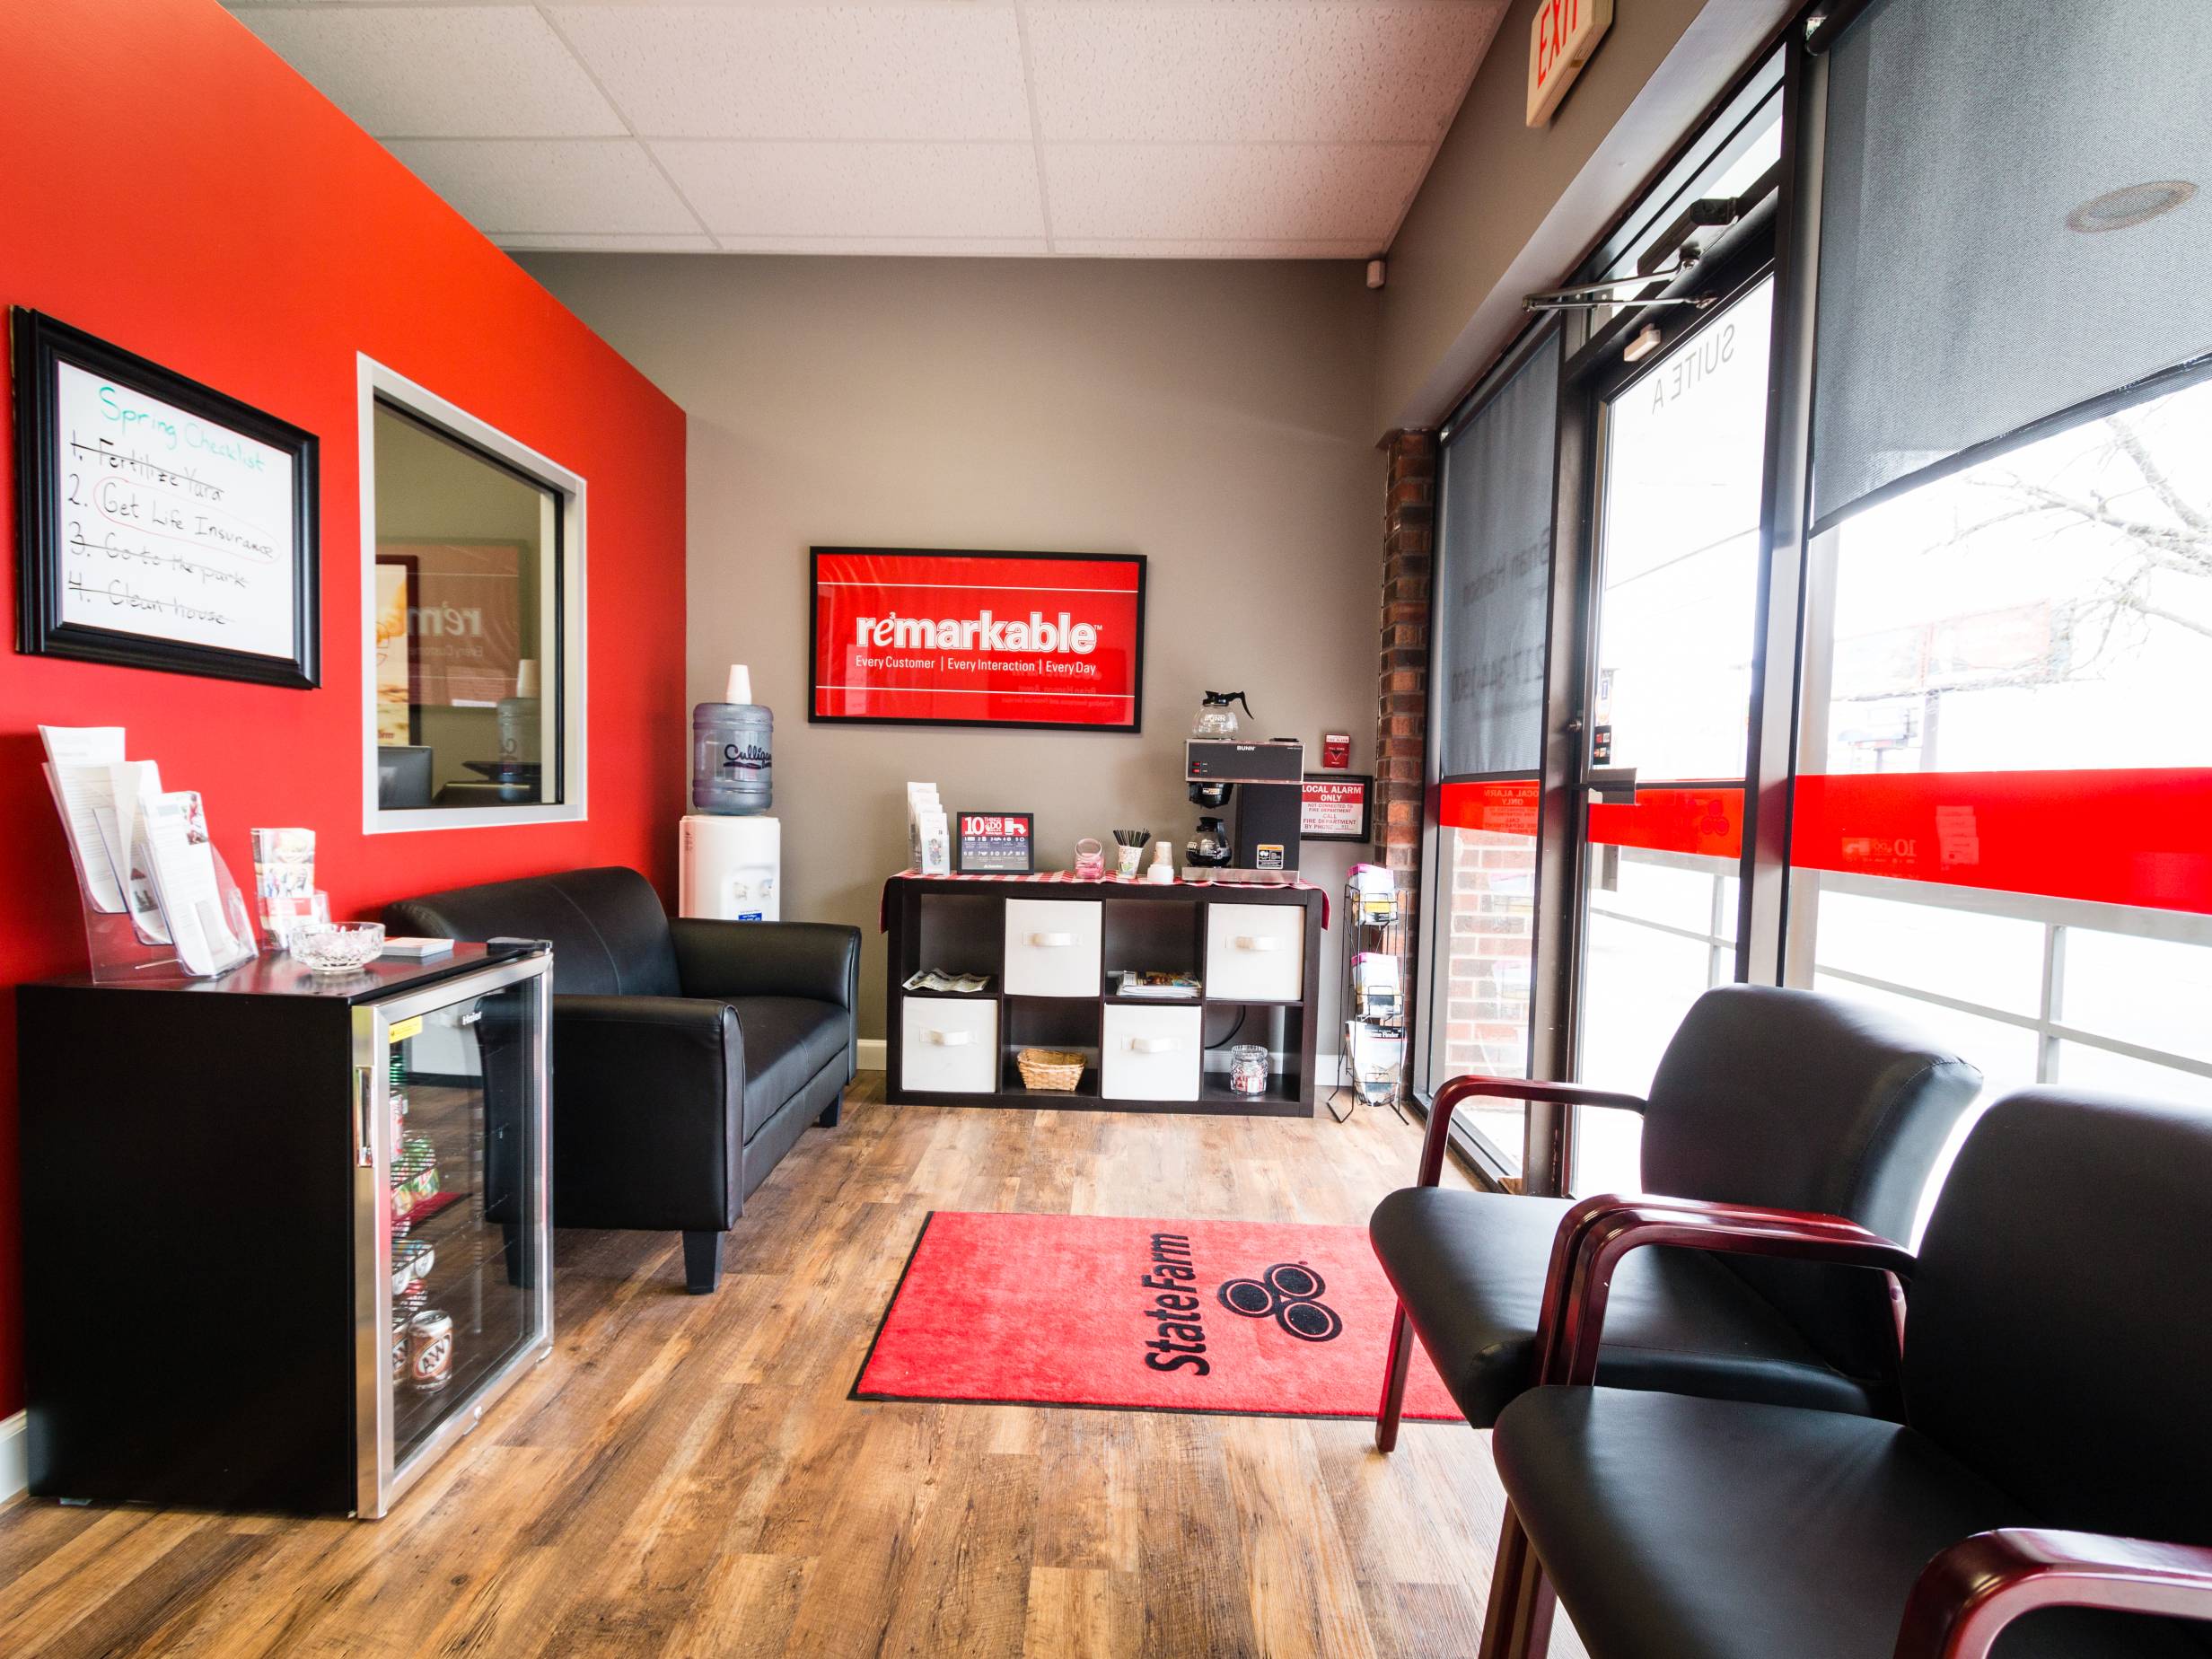 Local State Farm agent Brian Hanson debuts updated space in Urbana